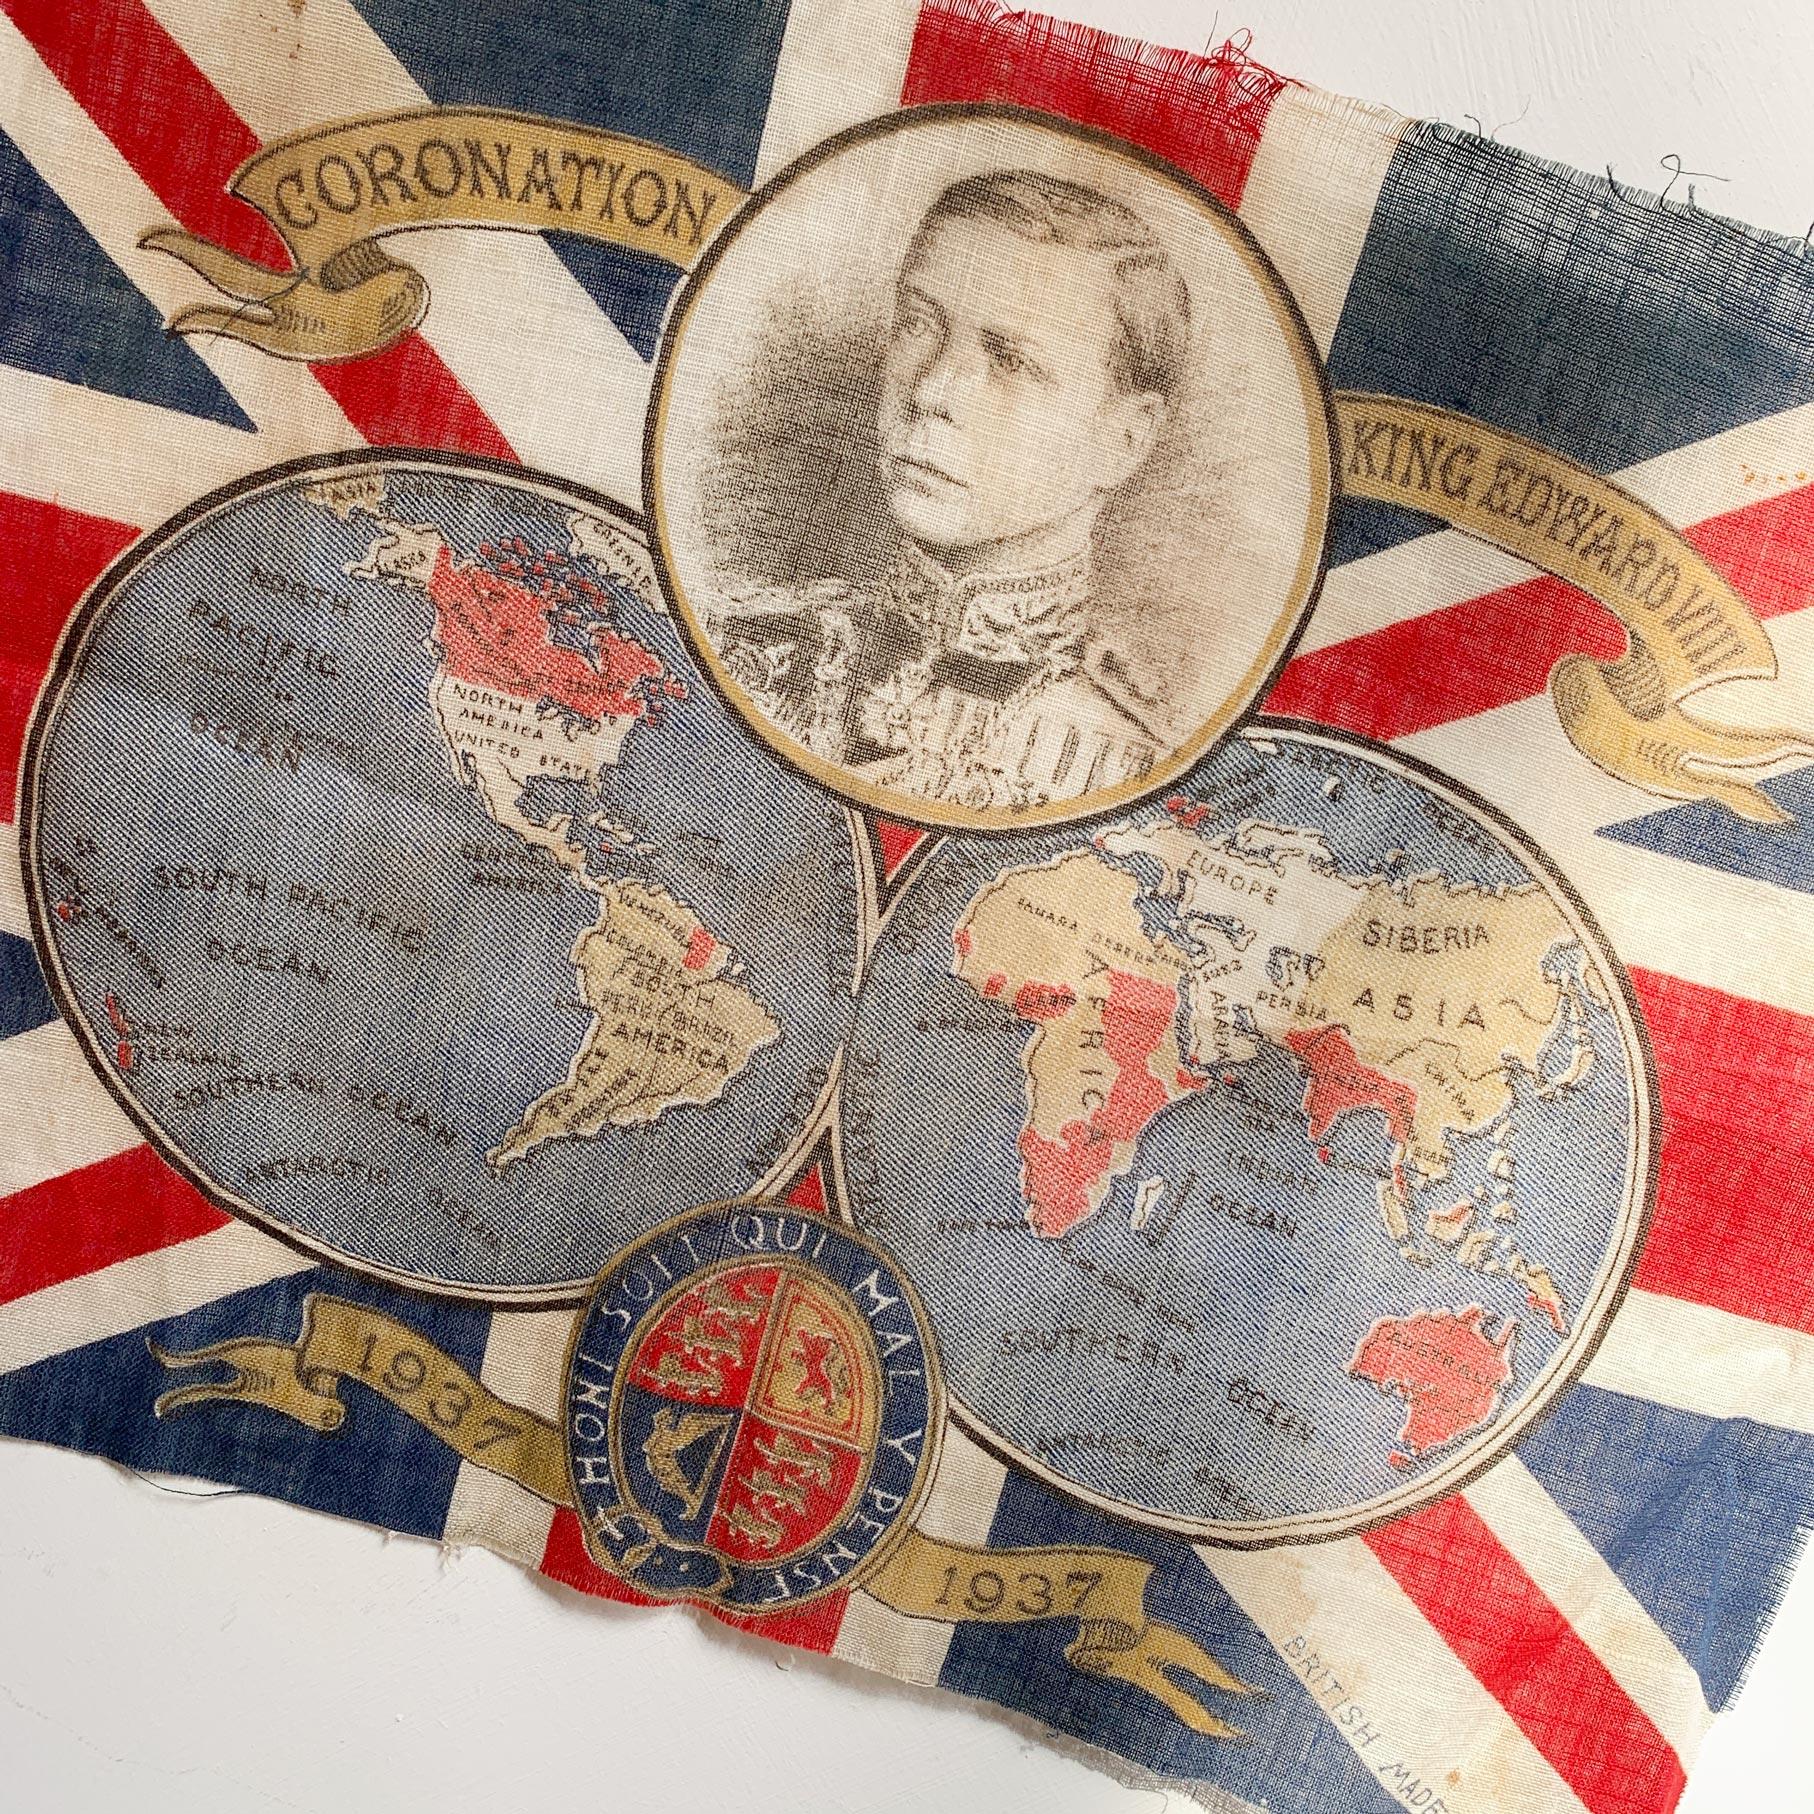 British Royal Family

A Rare And Historical Royal Coronation Flag from The Coronation Of HRH King Edward VIII, this flag was produced to commemorate the crowning of King Edward VIII which was to take place in 1937 but never happened due to his